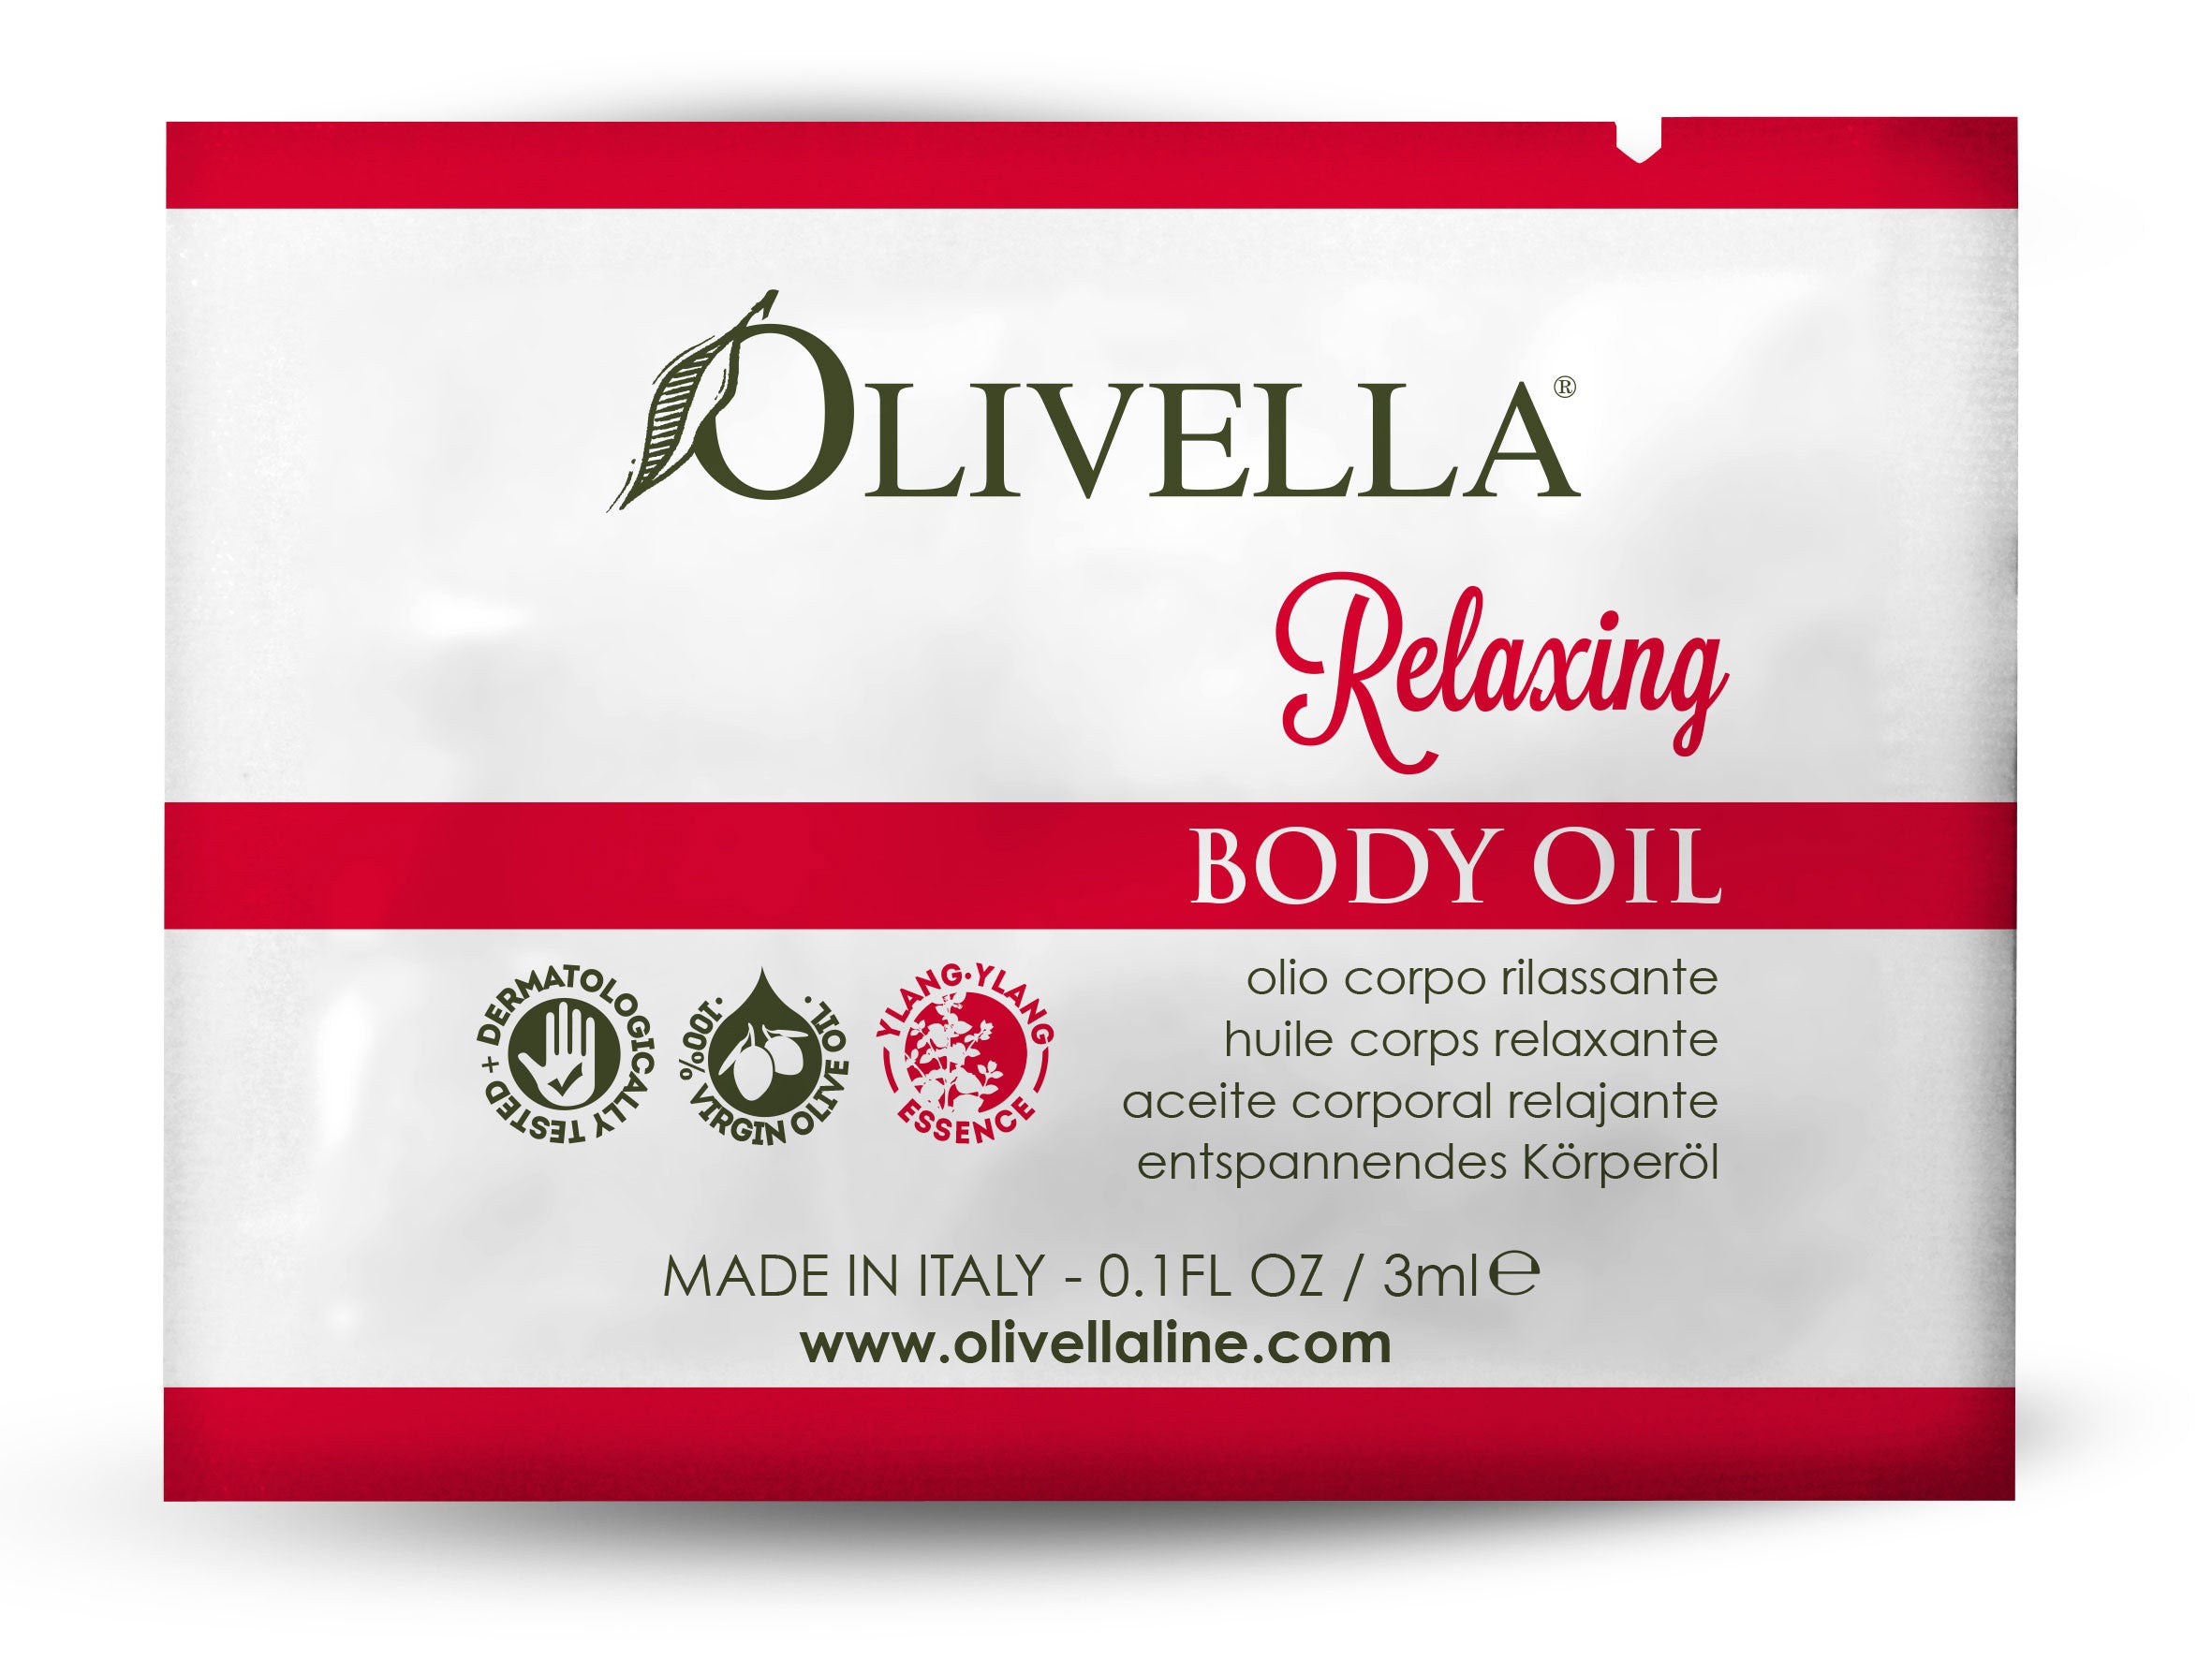 Olivella Body Oil Relaxing Sample - Olivella